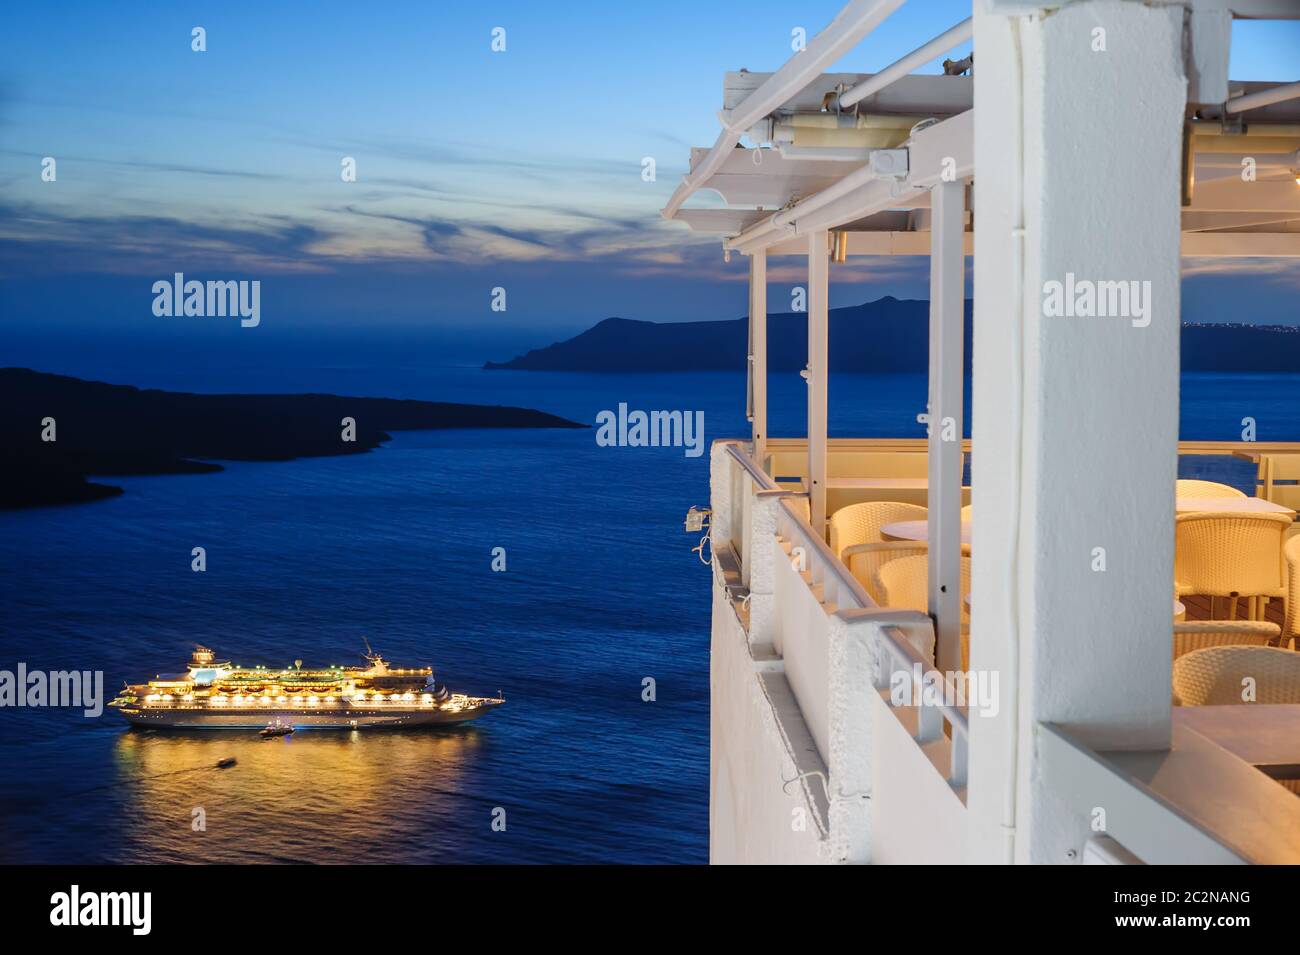 Enlighted cruise ship after sunset near Fira town at Santorini island, Greece Stock Photo